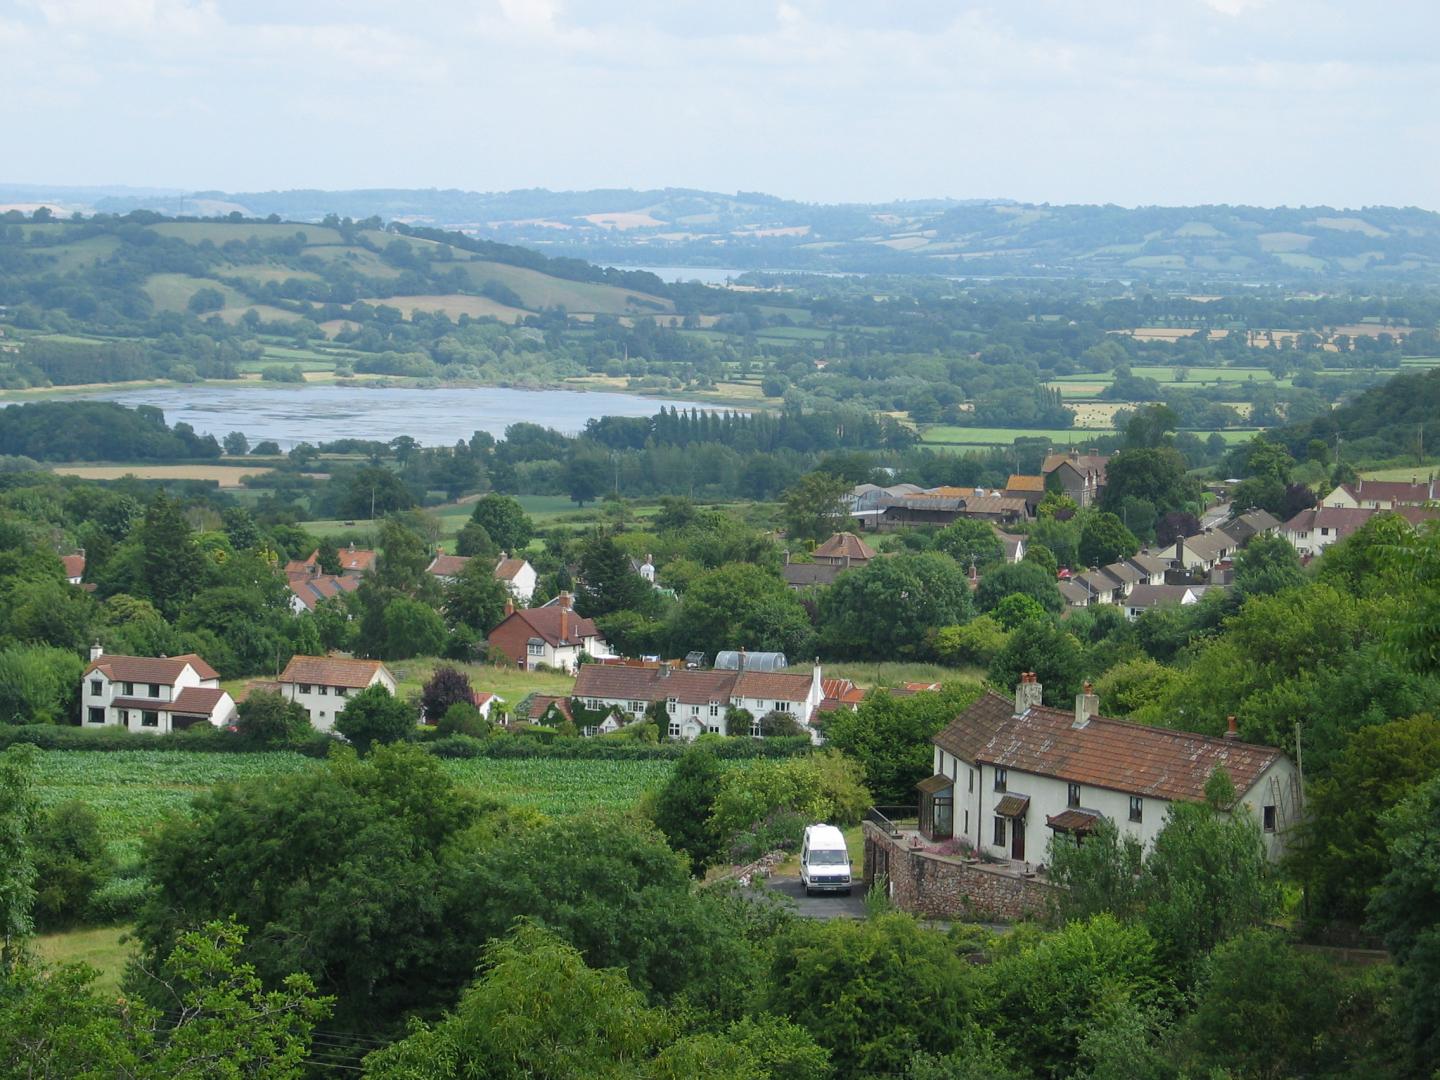 View of homes and Blagdon Lake